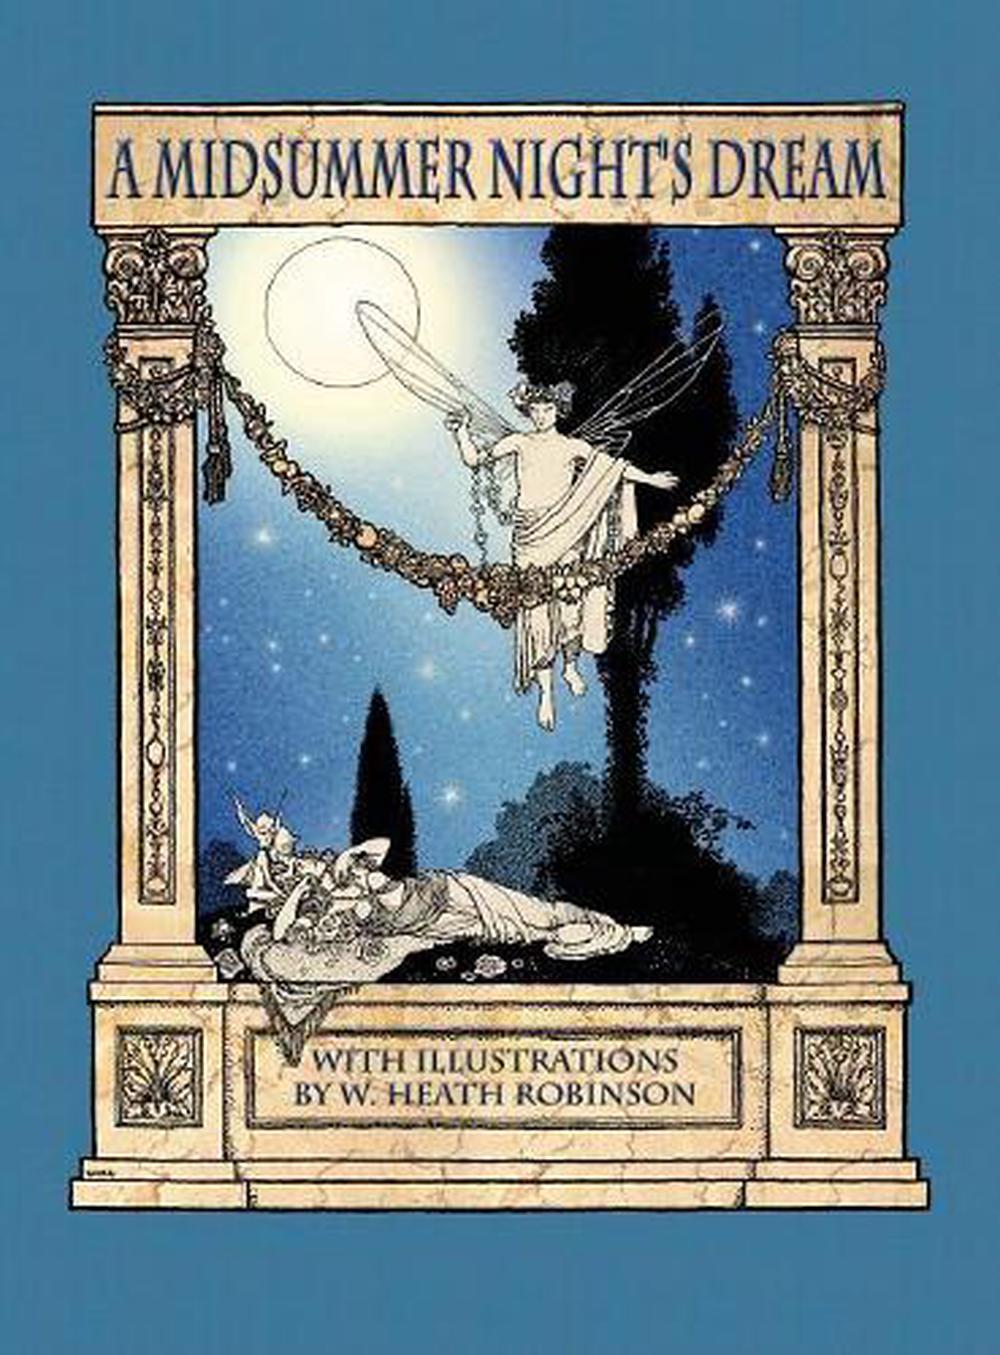 A Midsummer Nights Dream By William Shakespeare English Hardcover Book Free S 9781909115996 3831